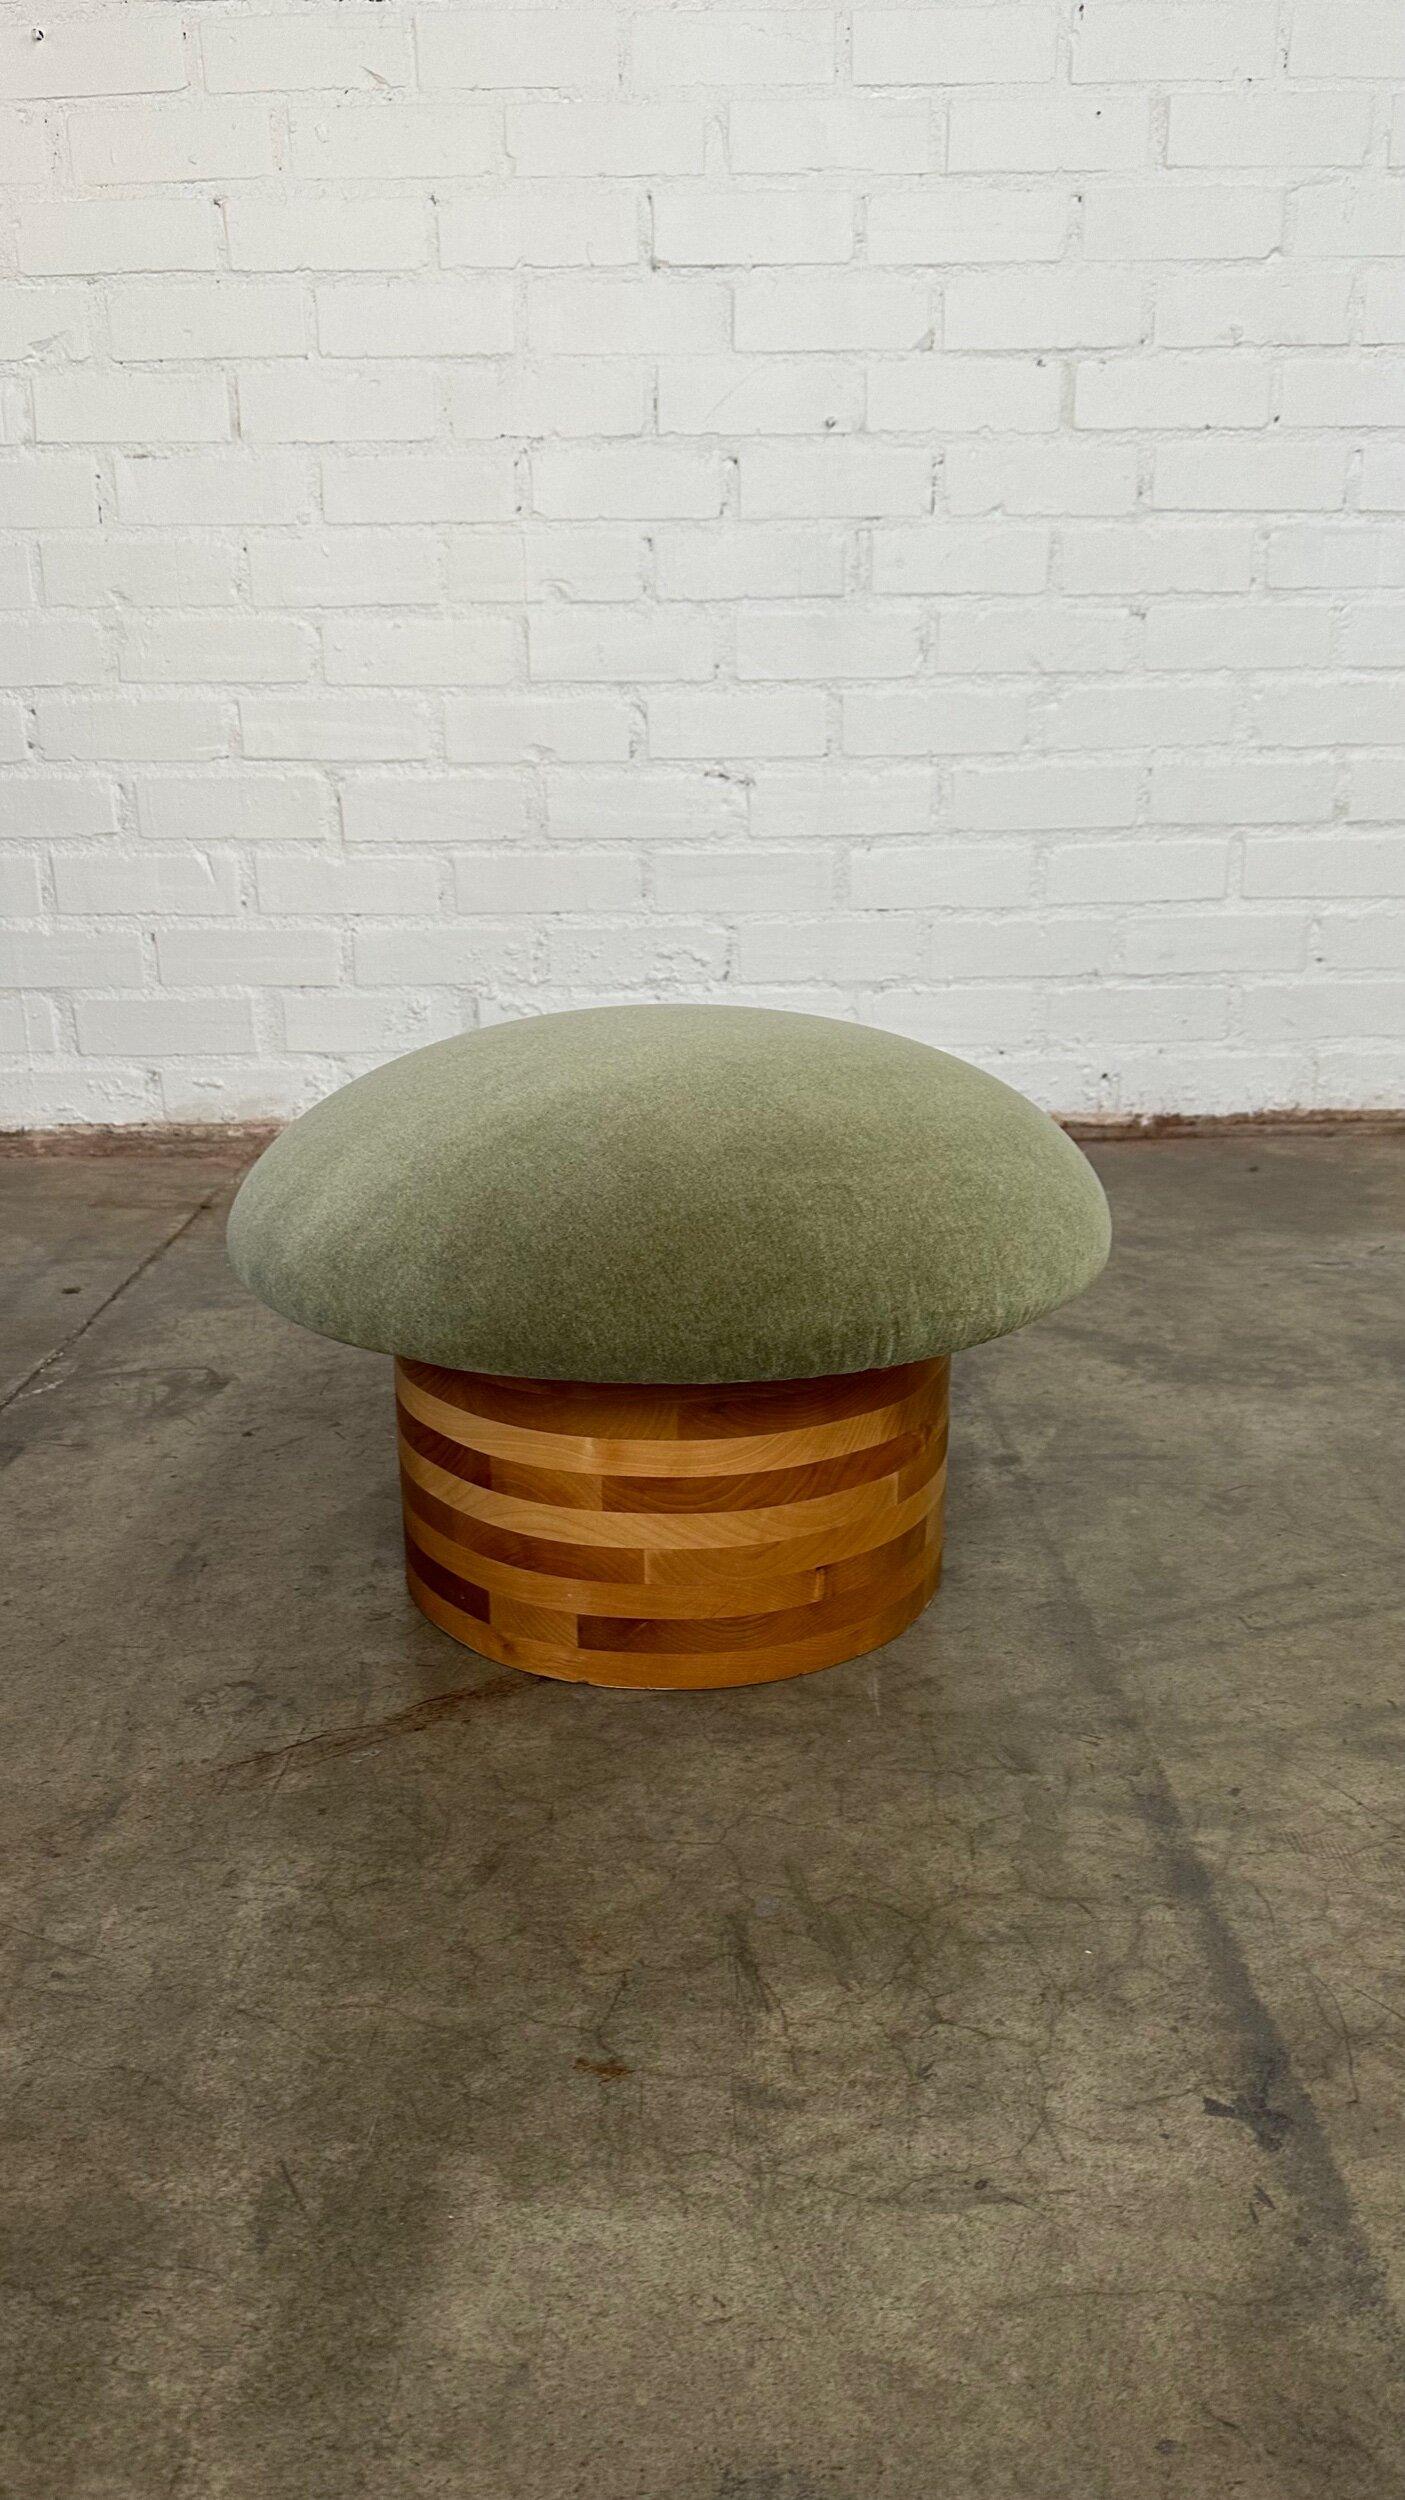 W23 D23 H16

Handcrafted in house our new Miel Mushroom features a heavy solid honey colored wood base. Item is custom made to your specifications, fabric and dimensions can all be changed.